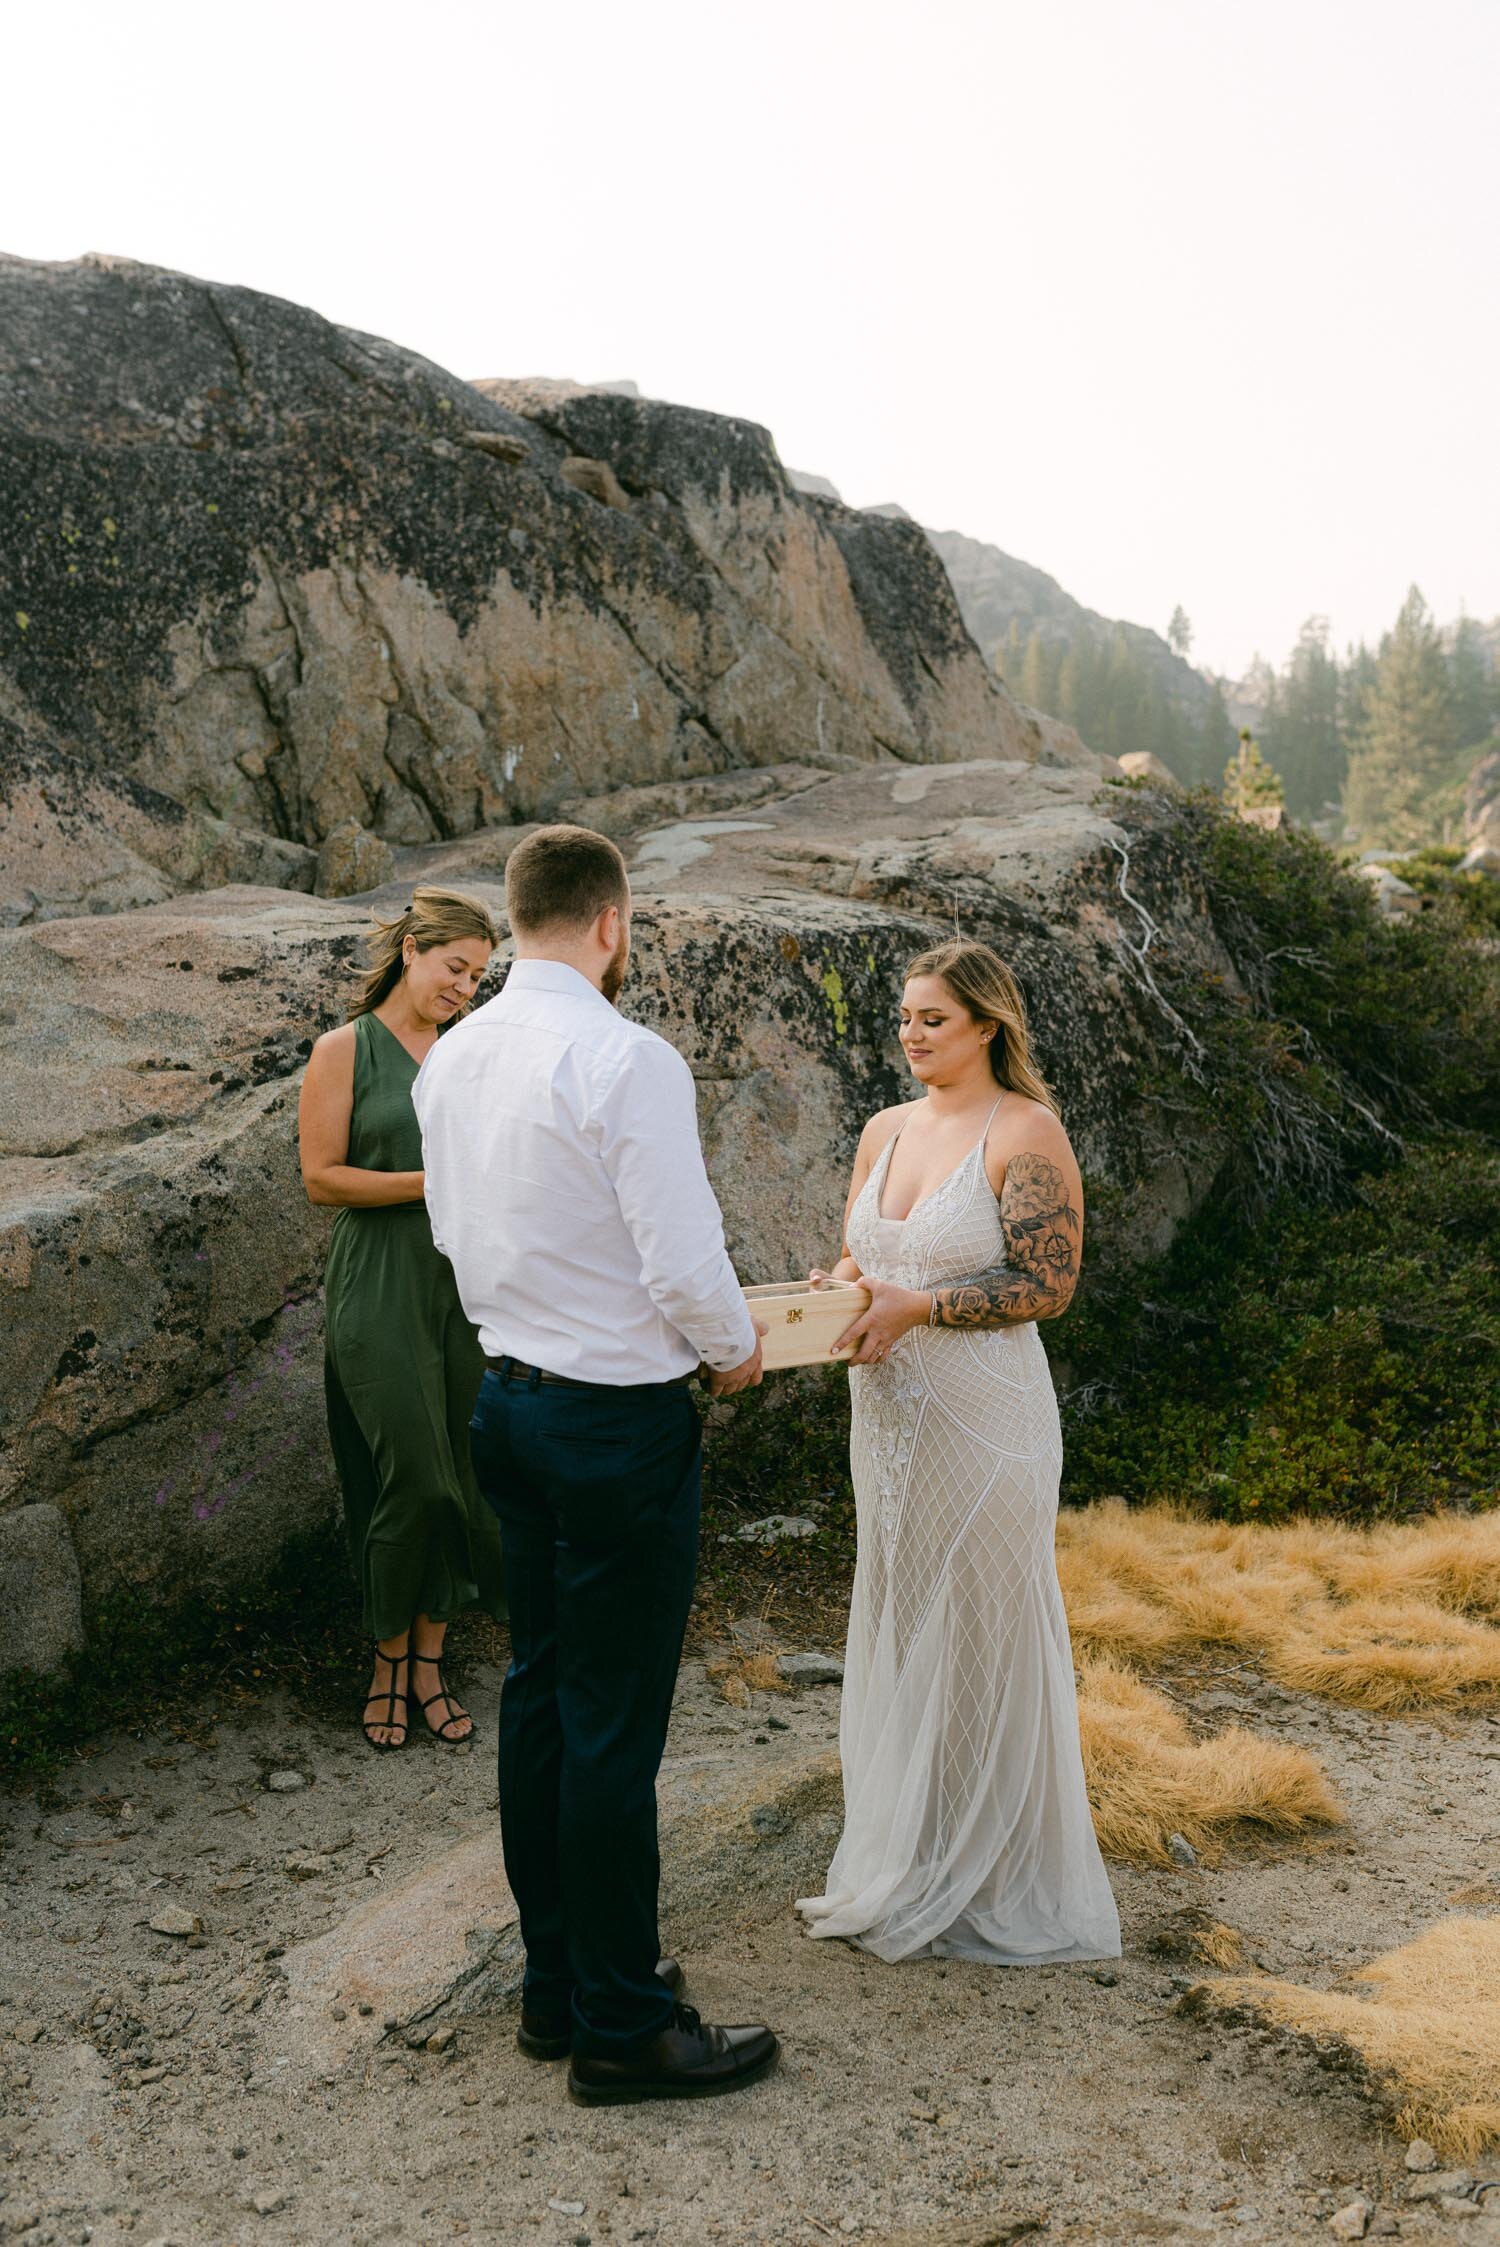 Donner Lake Elopement, photo of bride holding a wine box during the ceremony